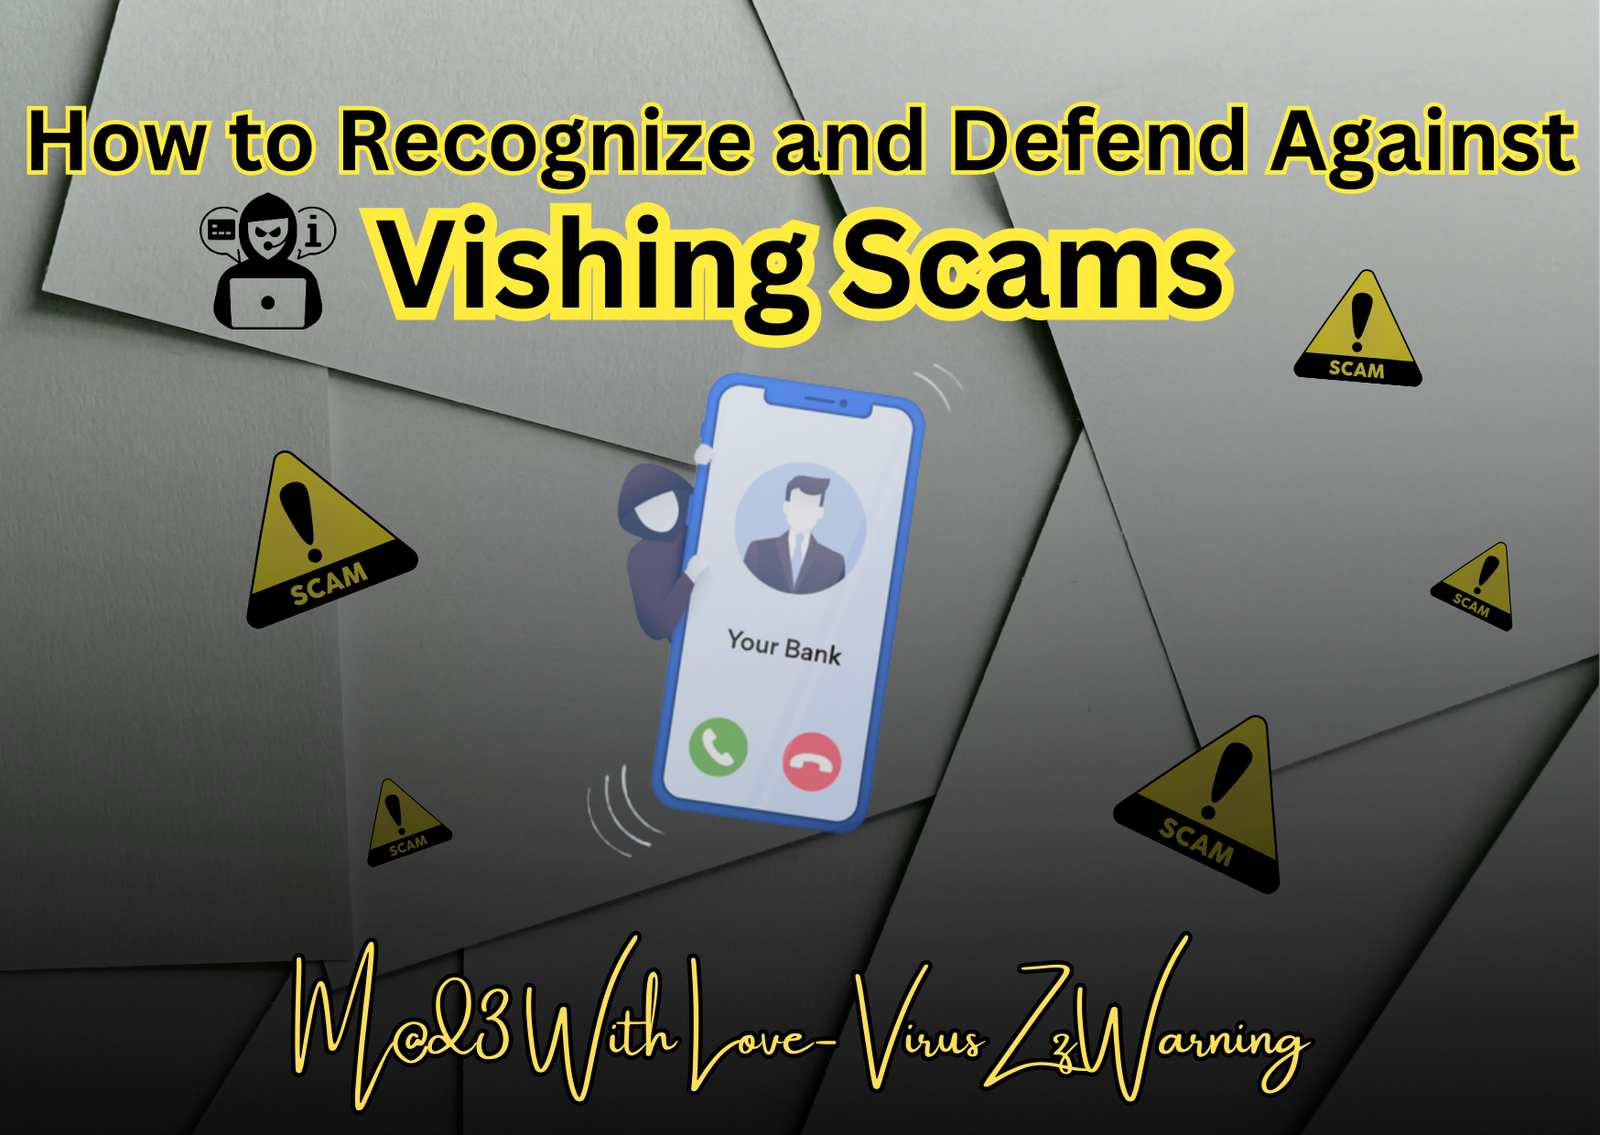 How to Recognize and Defend Against Vishing Scams